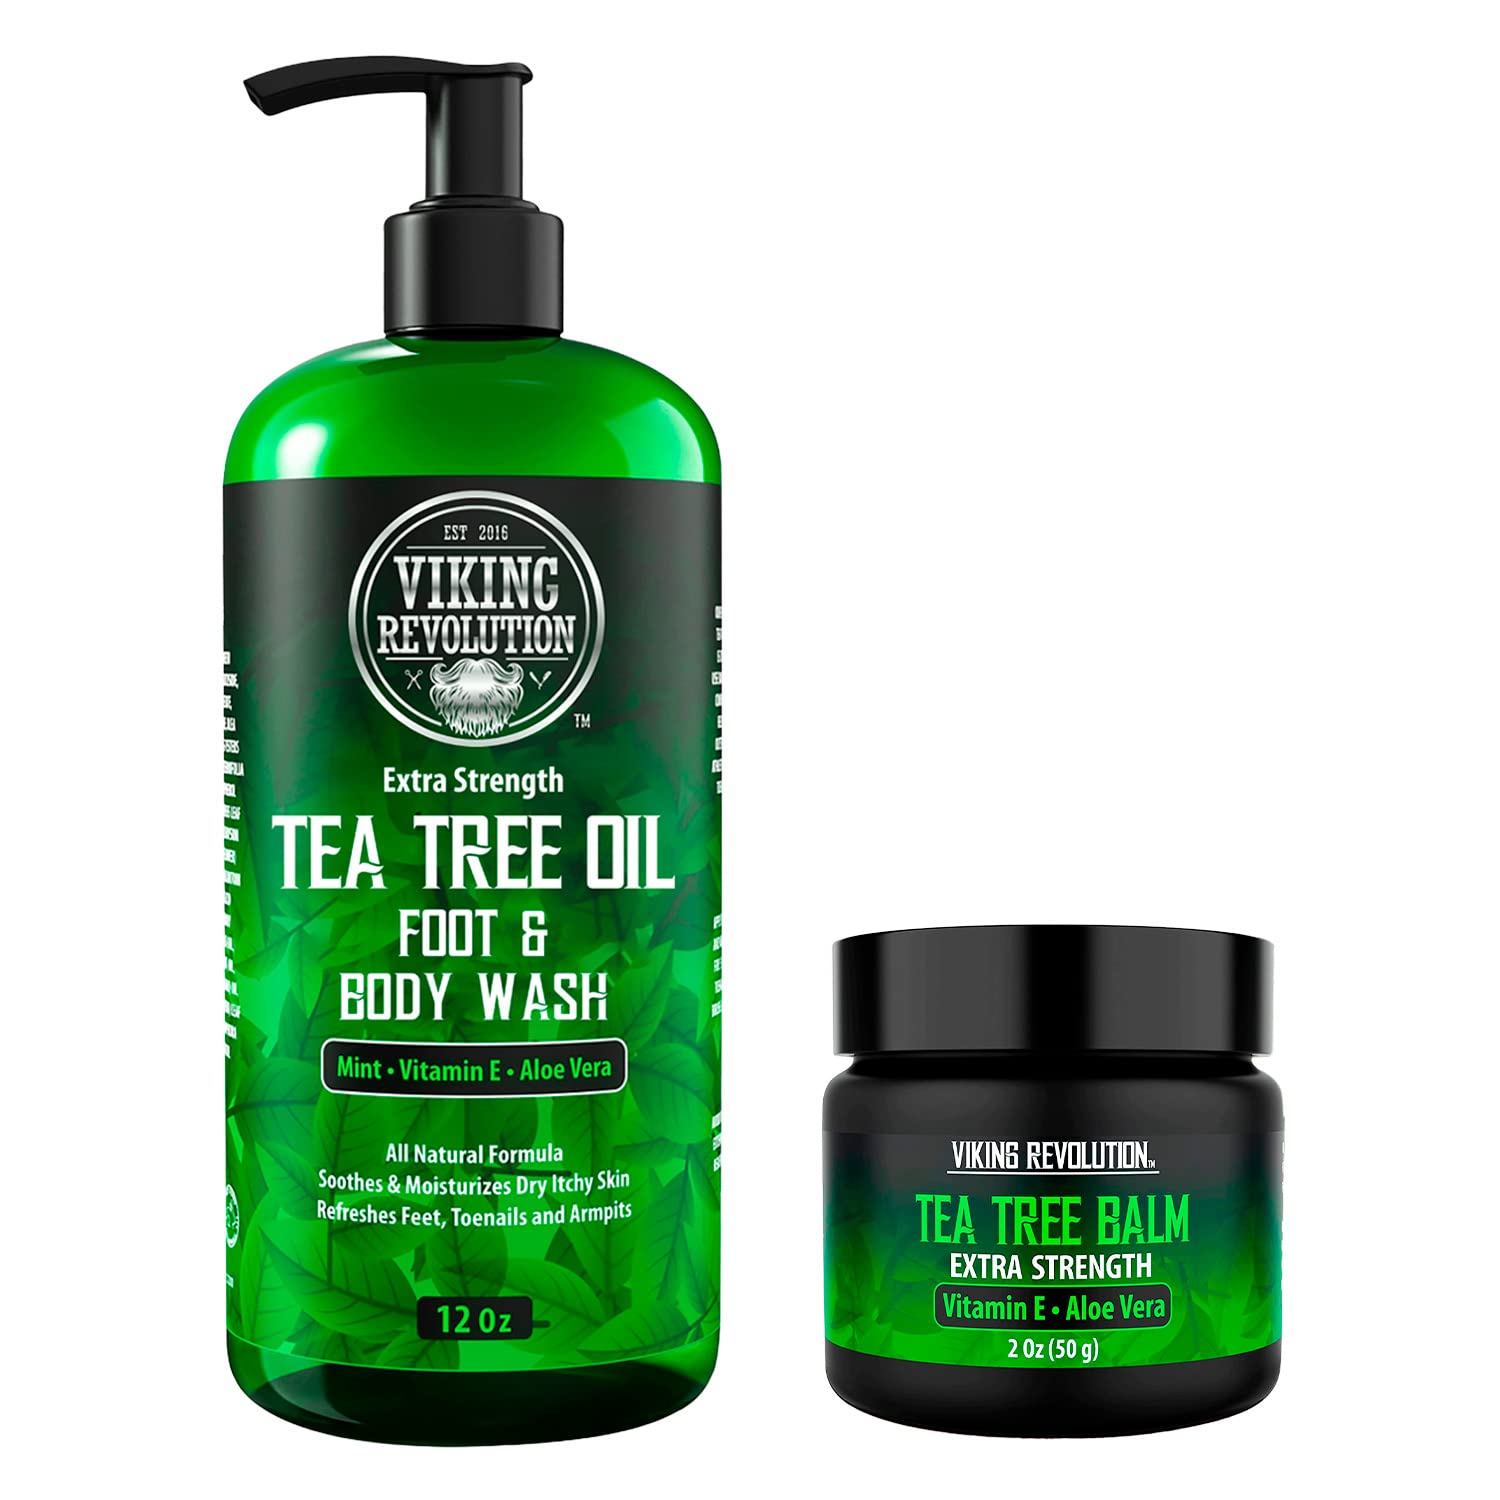 Viking Revolution Skin Cleaning Agent Tea Tree Kit for Men - Tea Tree Oil Set with Body Wash & Balm - Hydrating, Helps Athlete's Foot, Jock Itch, Eczema & Body Odors - Extra Strength, 2 Piece Set